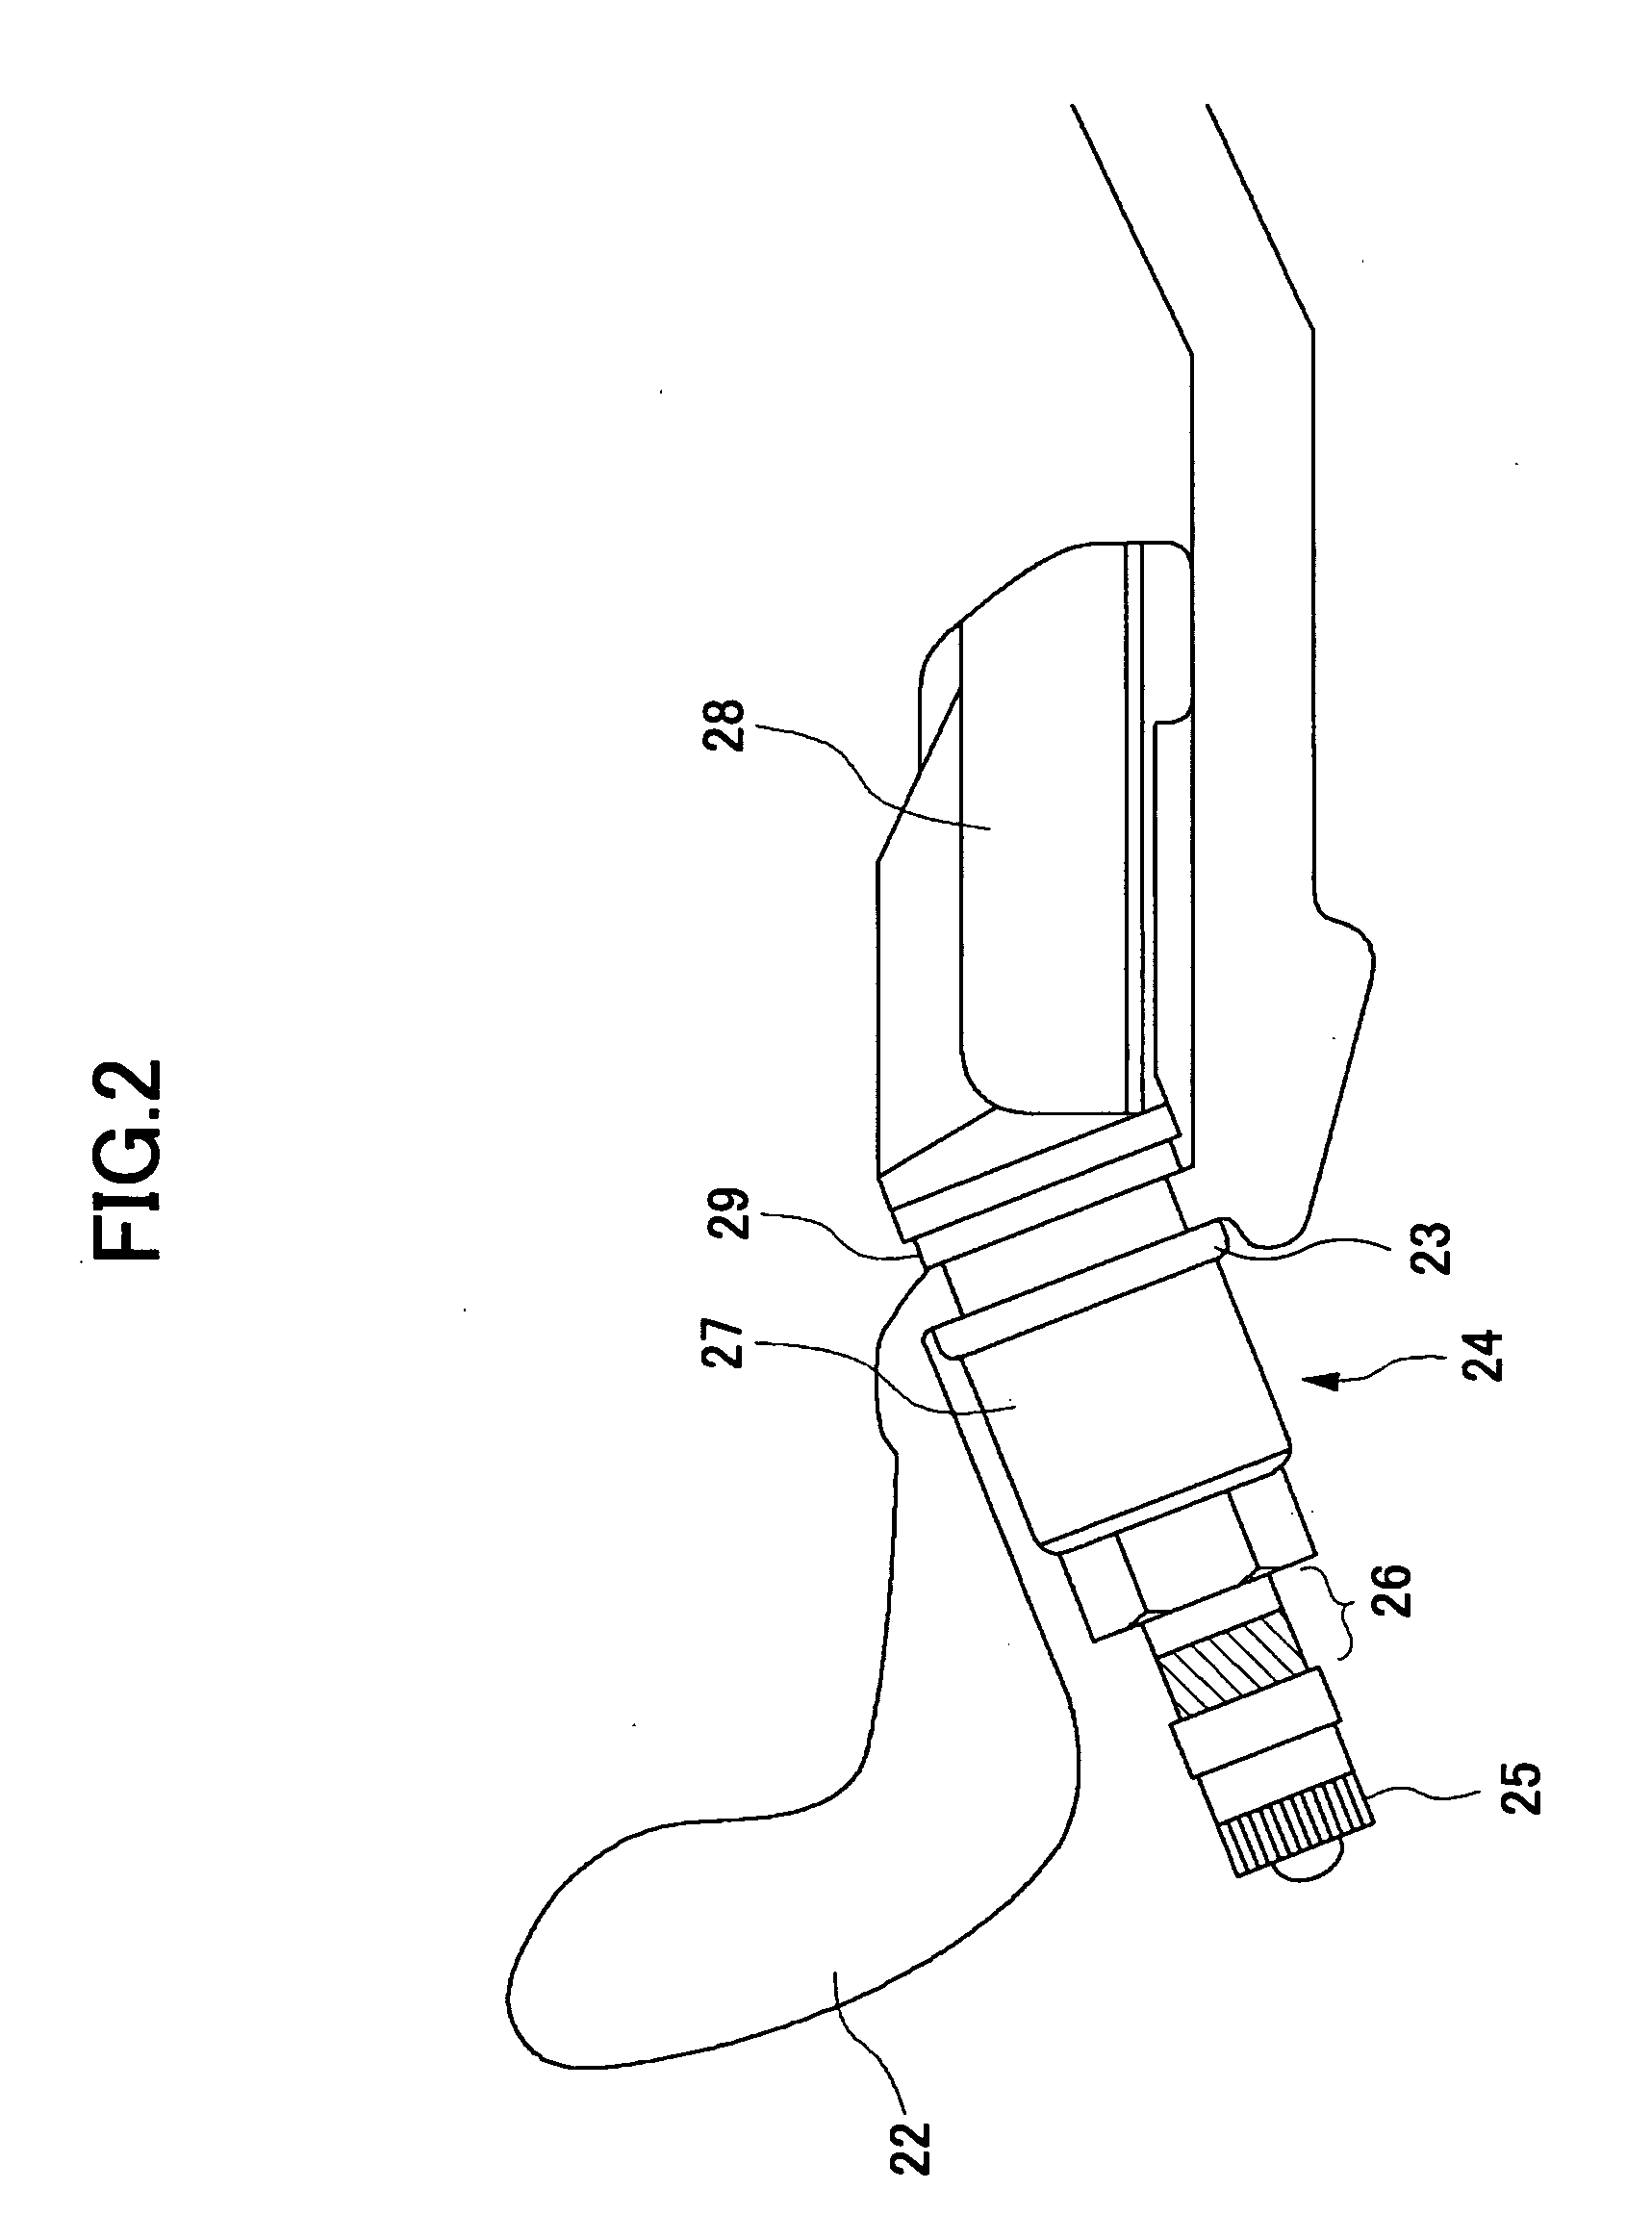 Tire condition display device